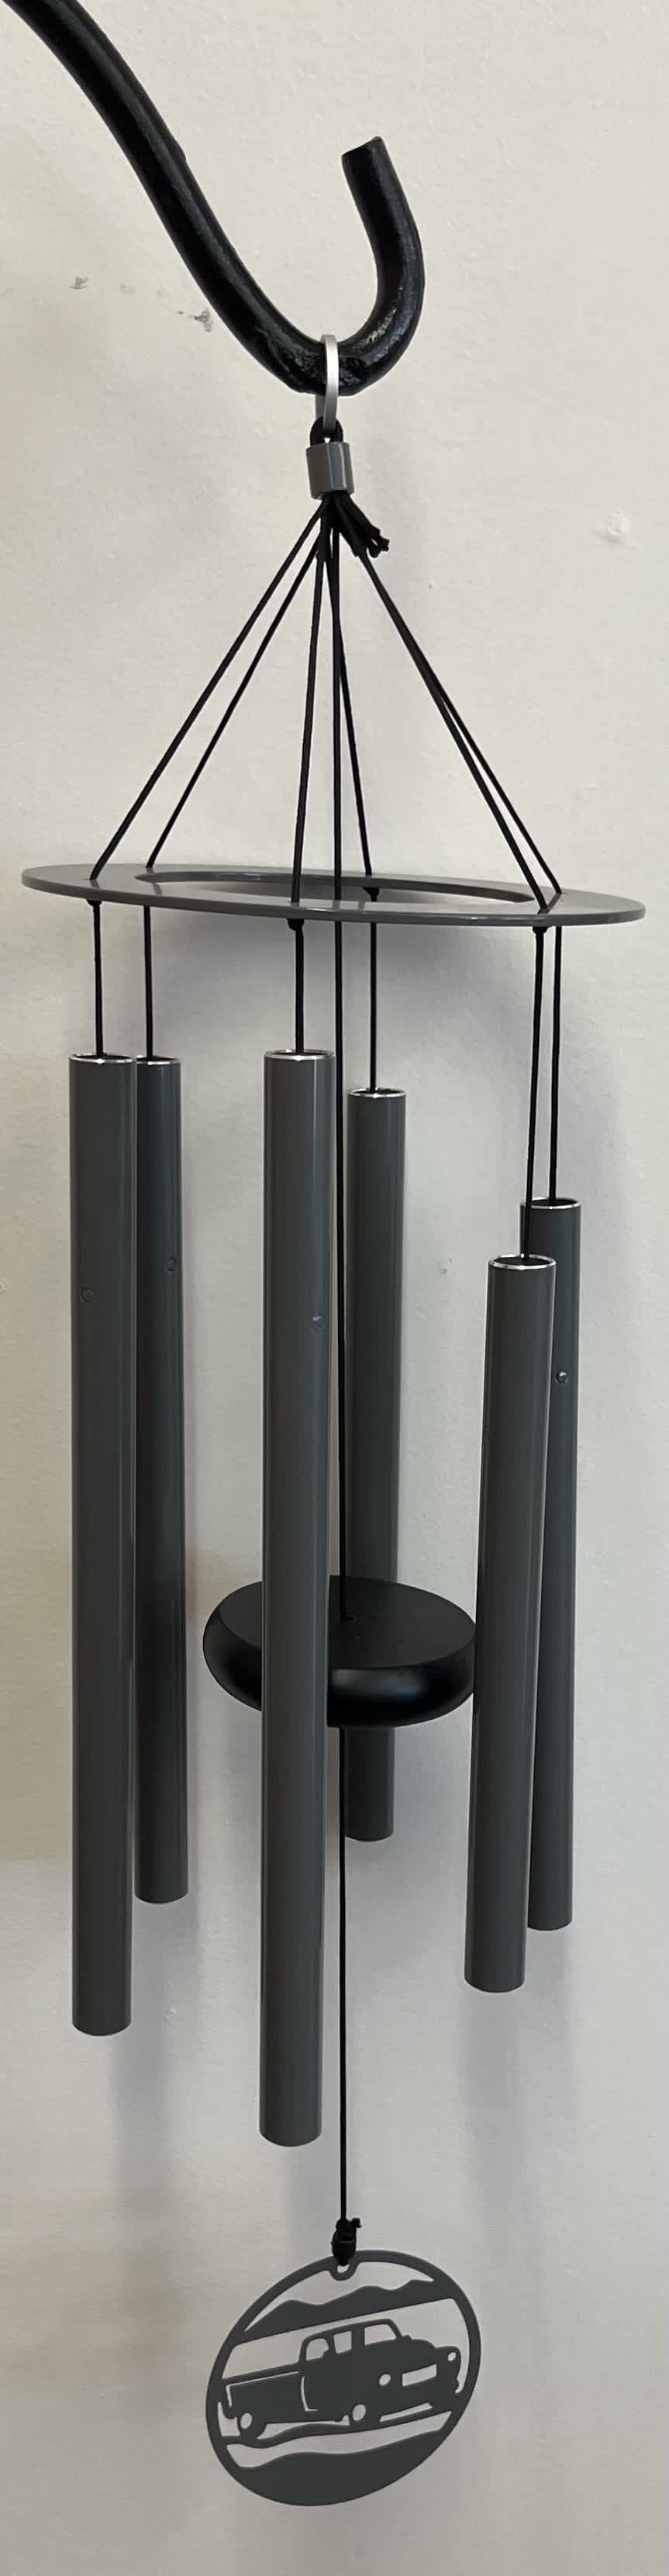 Truck Wind Chime - Grey wind chime with truck pendant.